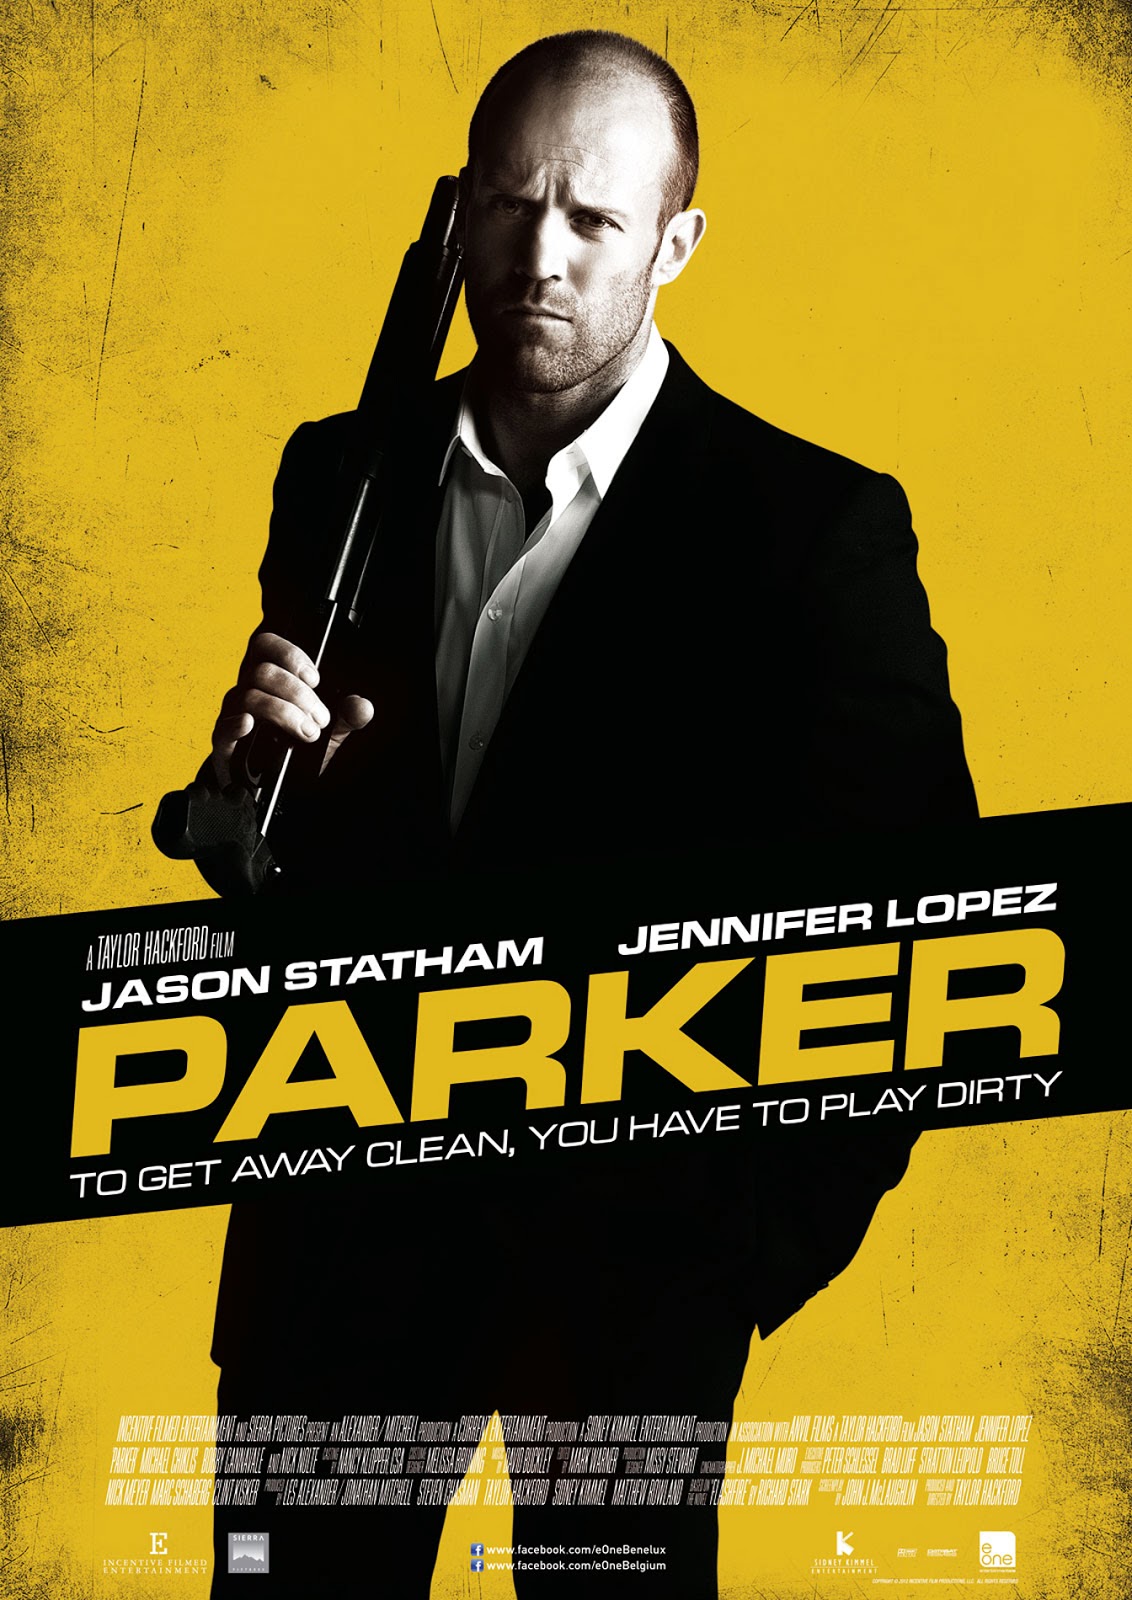 jason statham hd wallpapers,movie,poster,yellow,album cover,action film